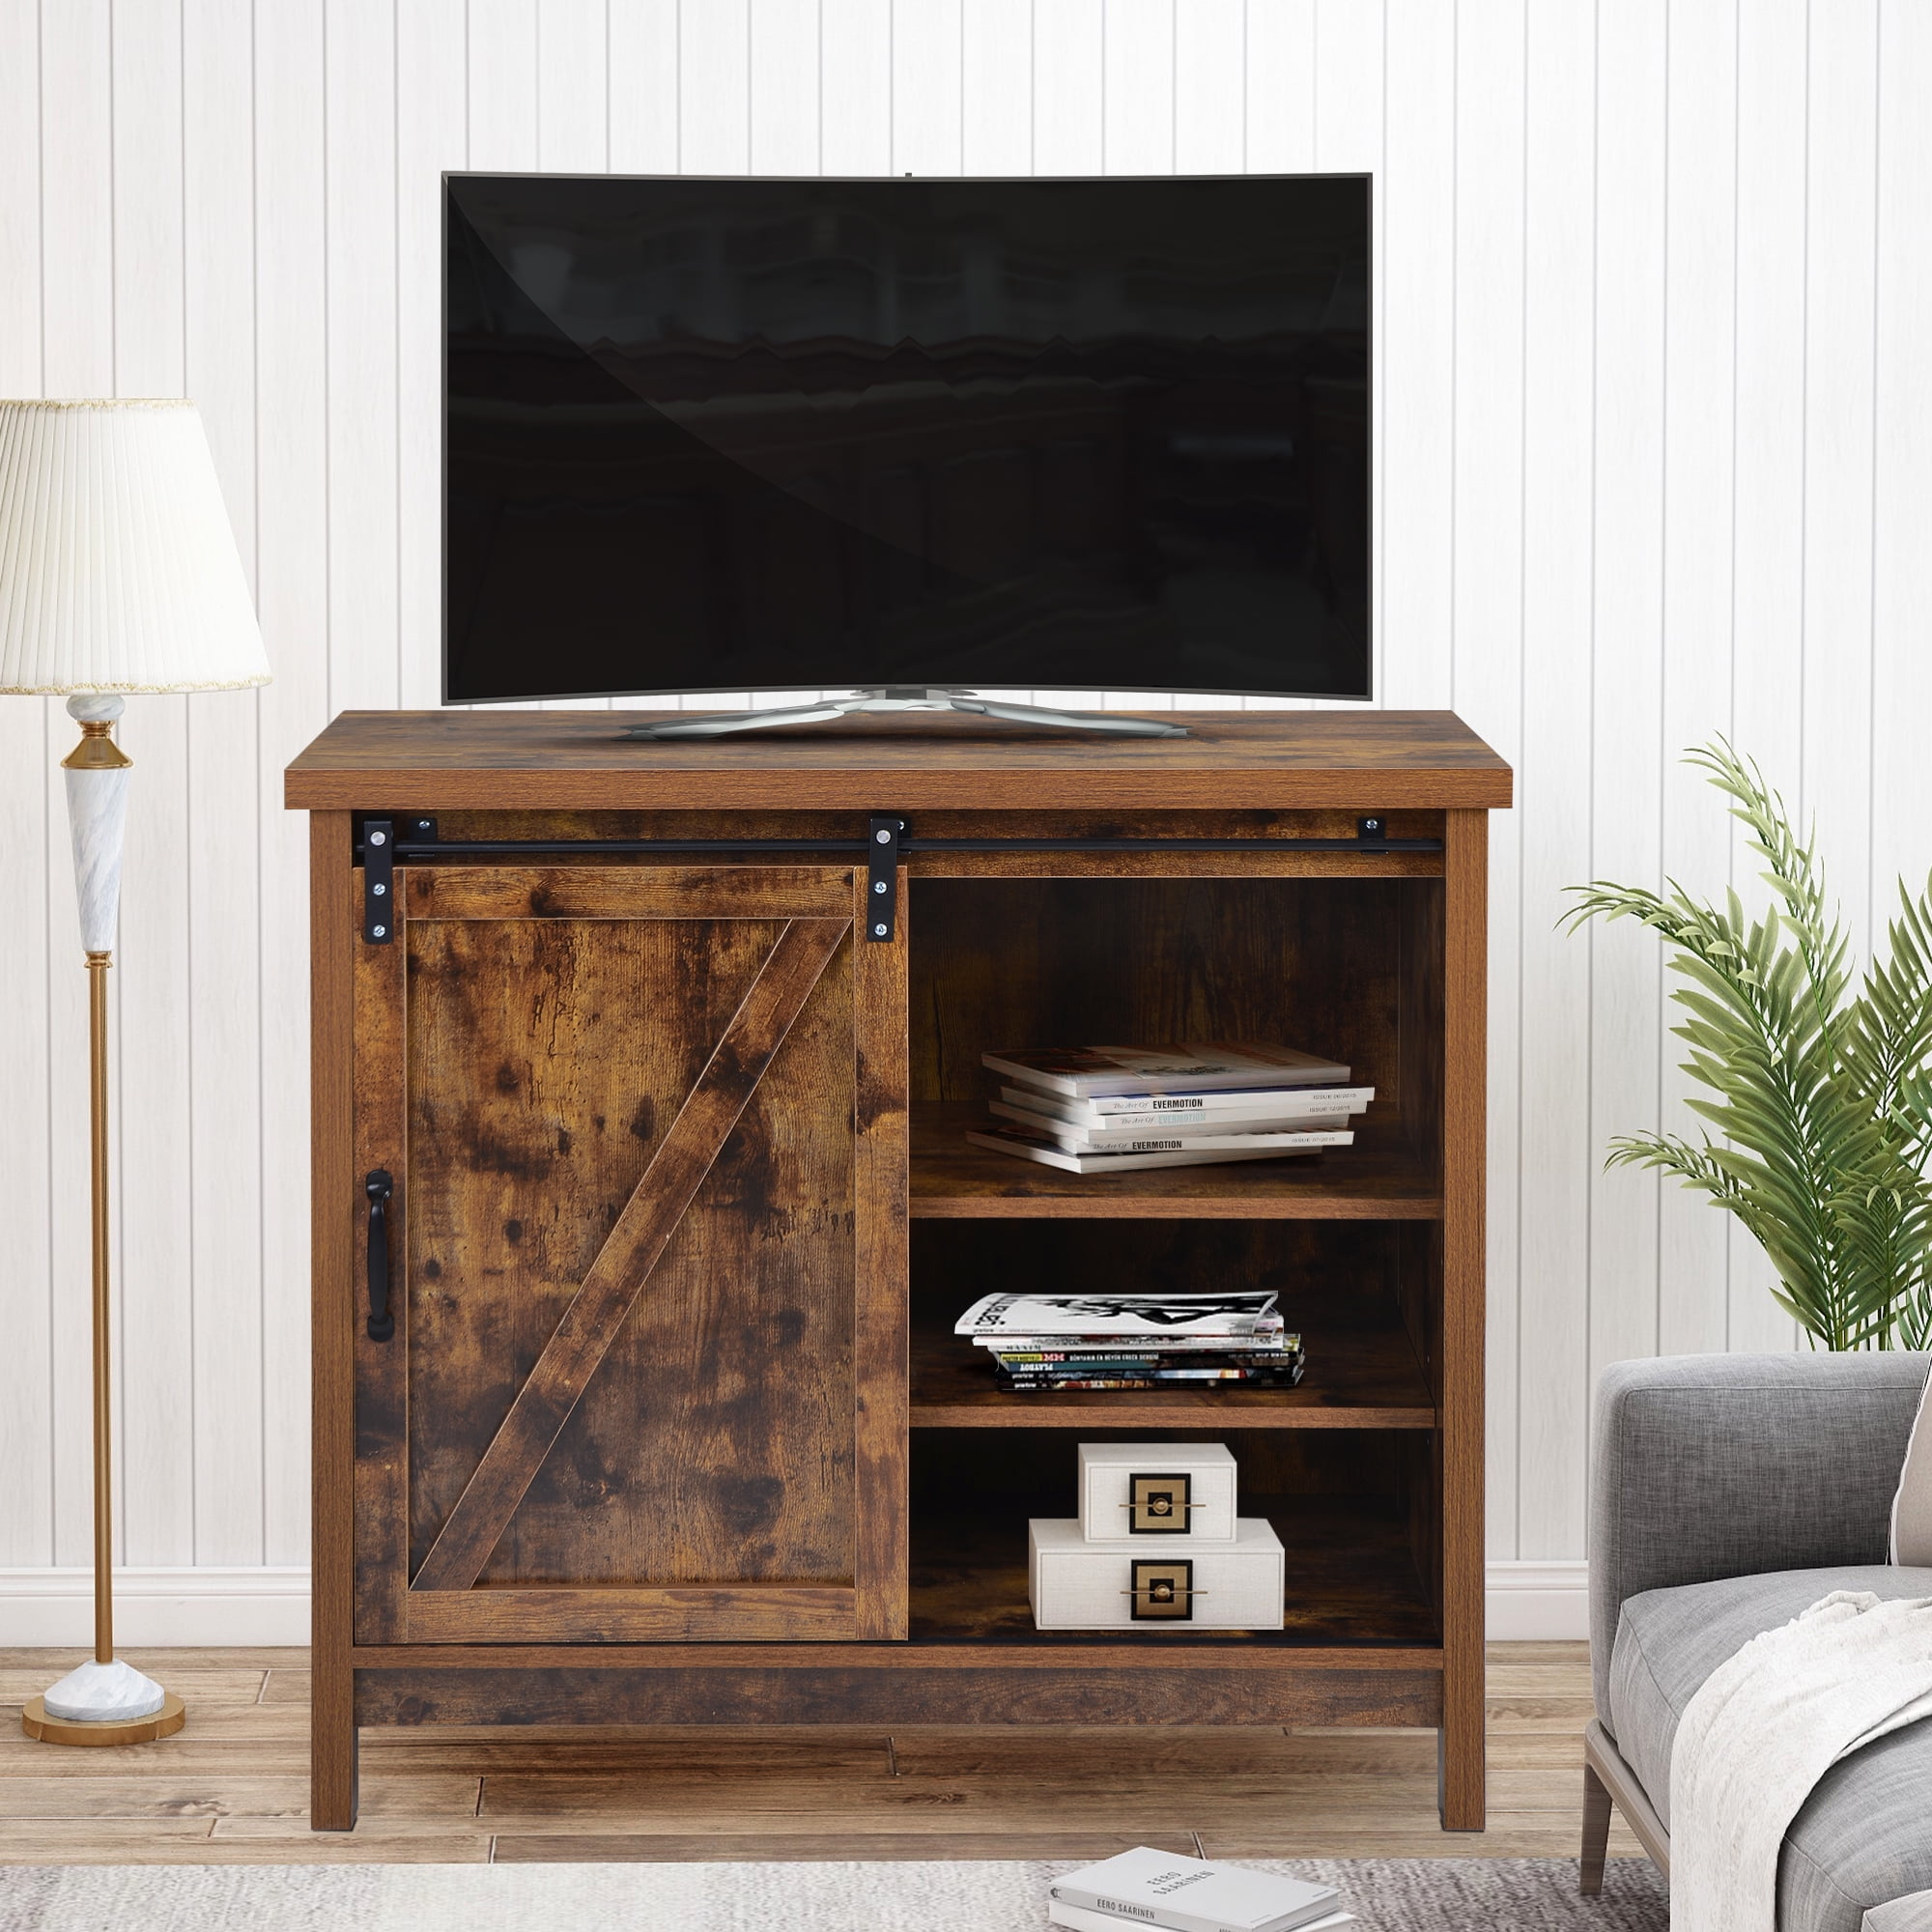 Details about   50" Wood Industrial Media Durable TV Stand W/ Storage Shelves Table Office Home 